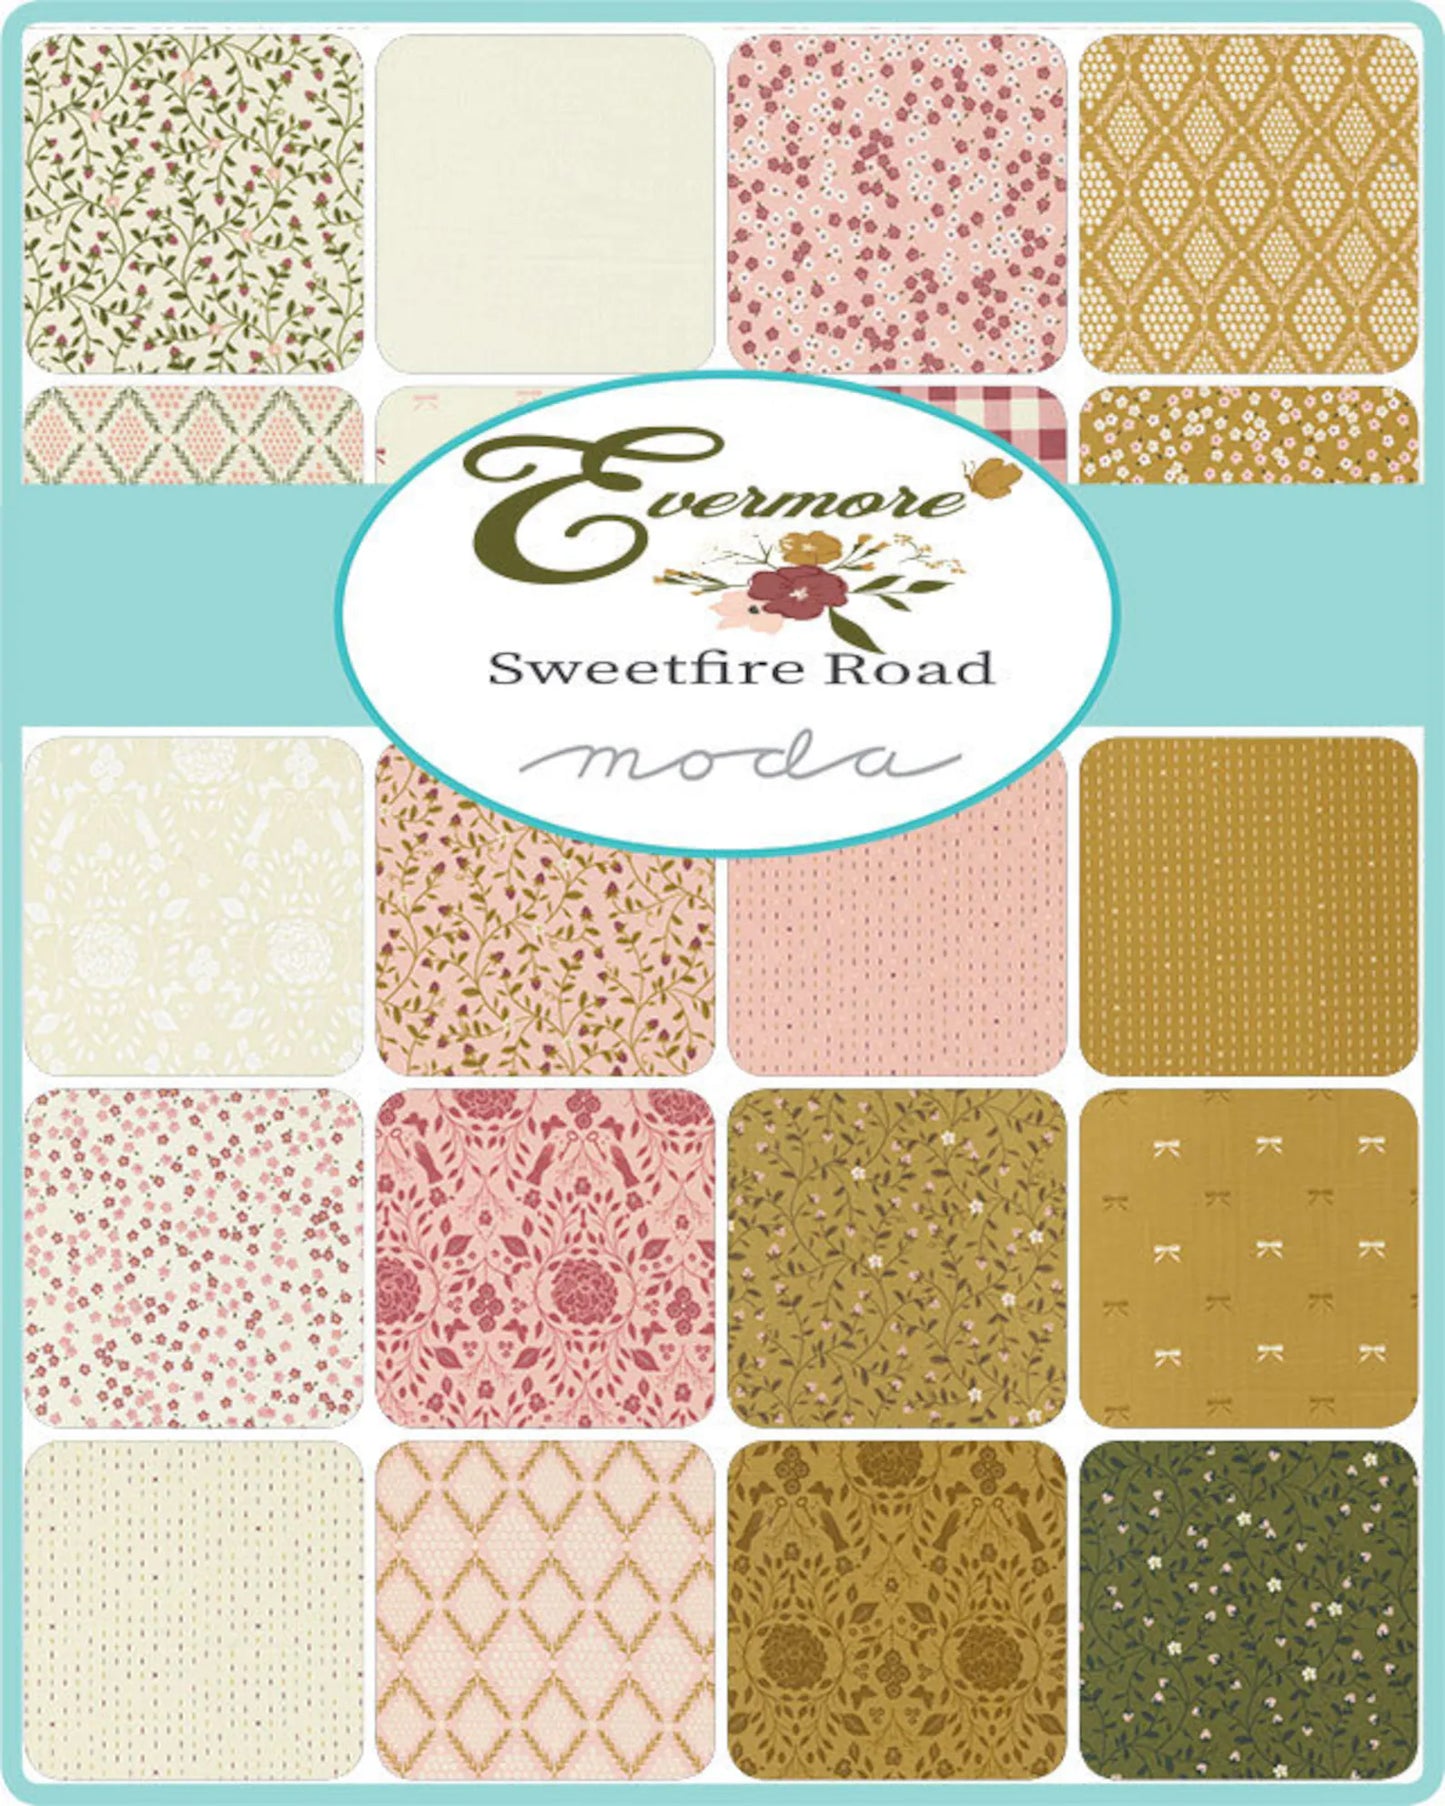 Evermore 5" charm pack fabric